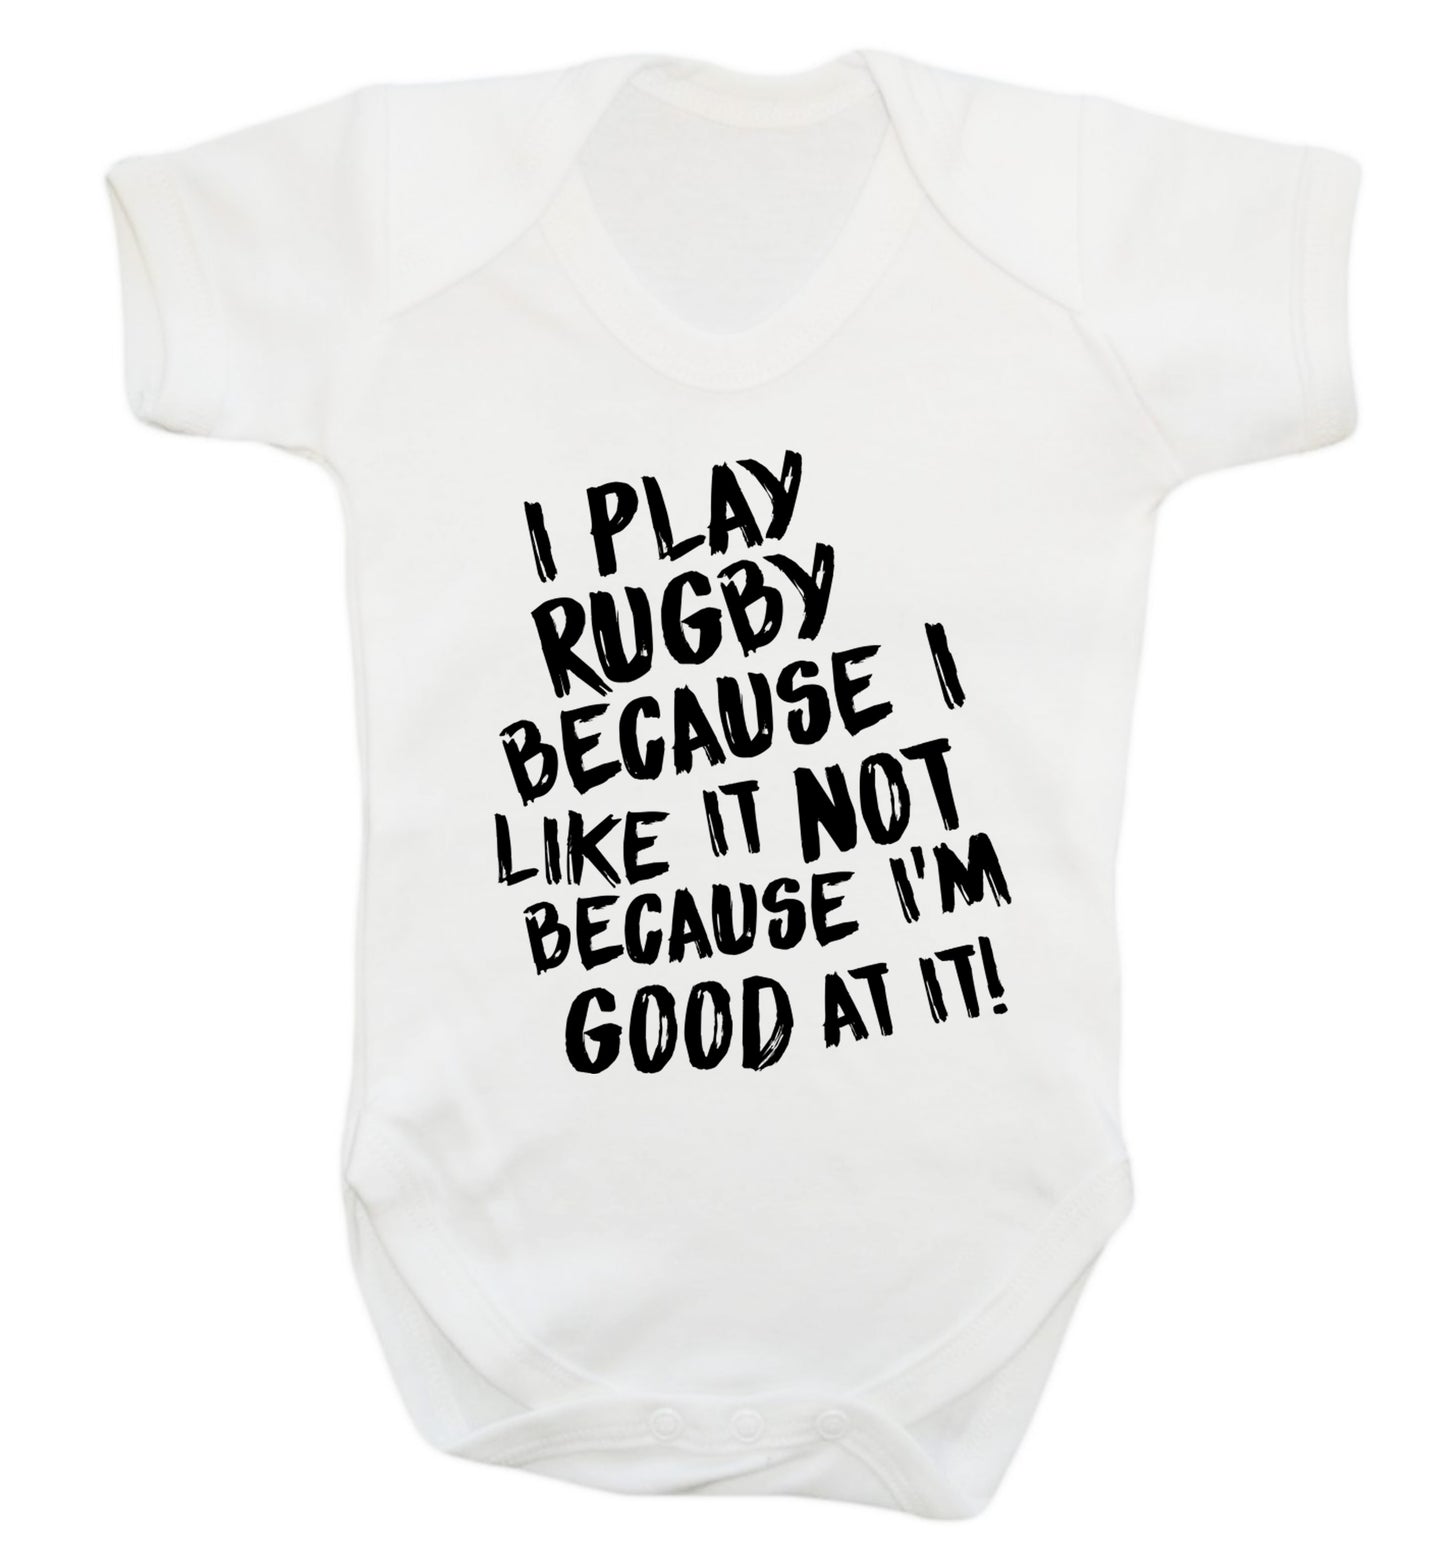 I play rugby because I like it not because I'm good at it Baby Vest white 18-24 months